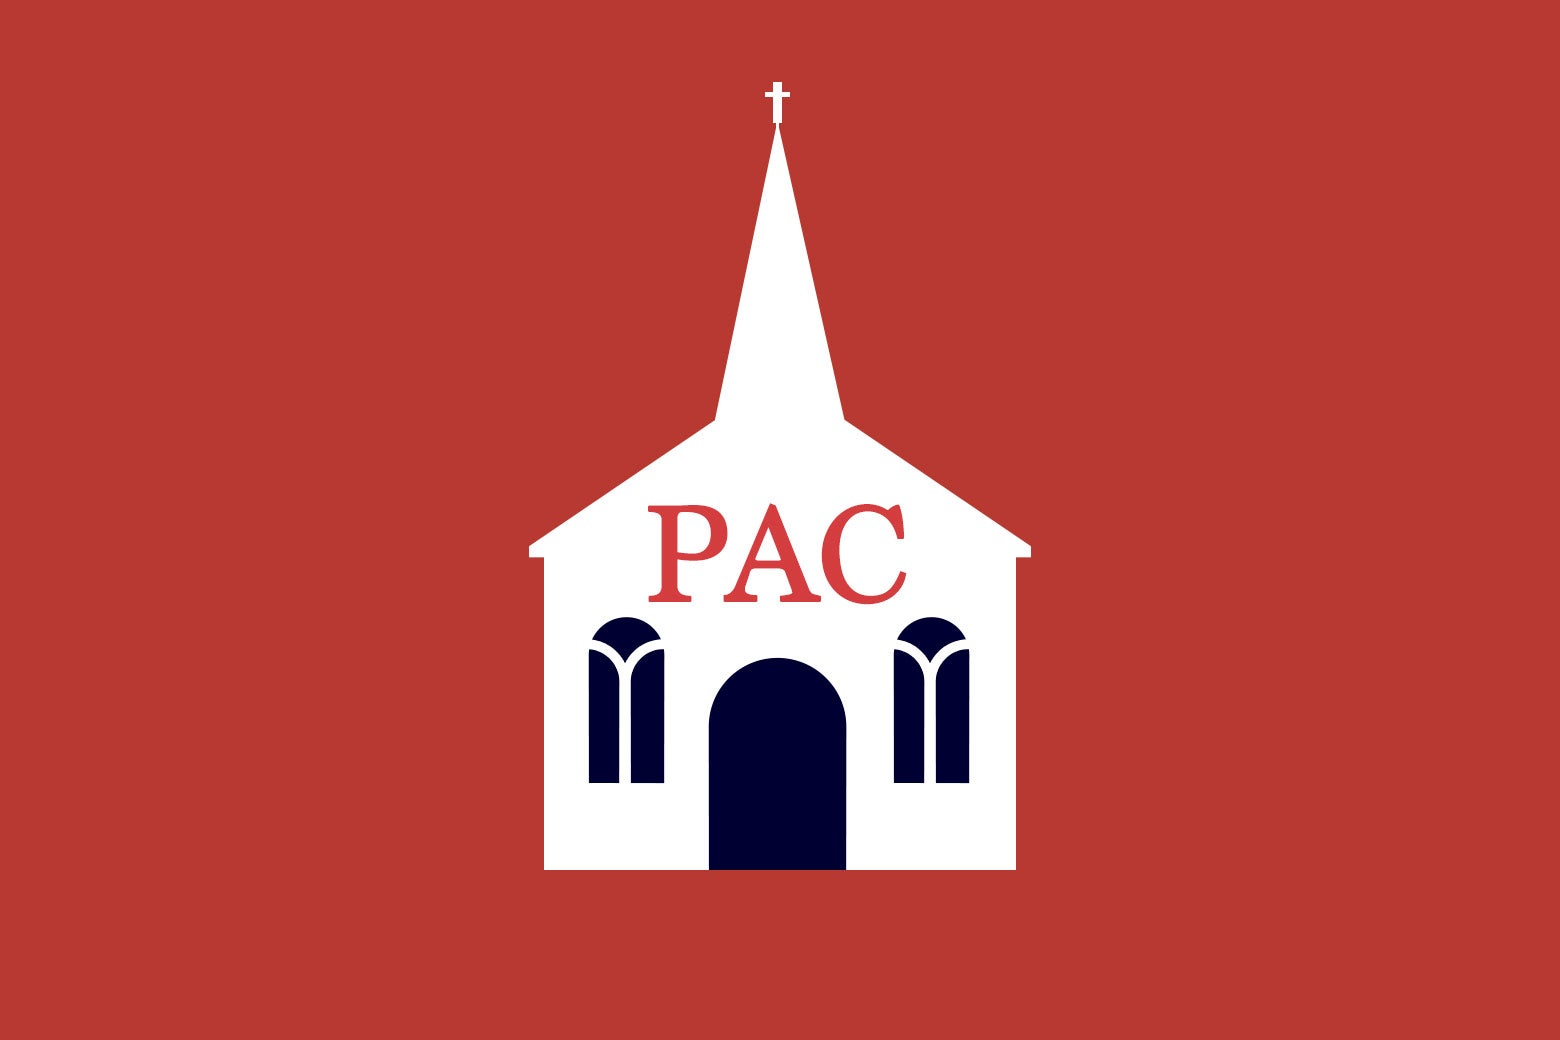 The white cut-out of a church and steeple, on a red background, has the words "PAC" written on it. 